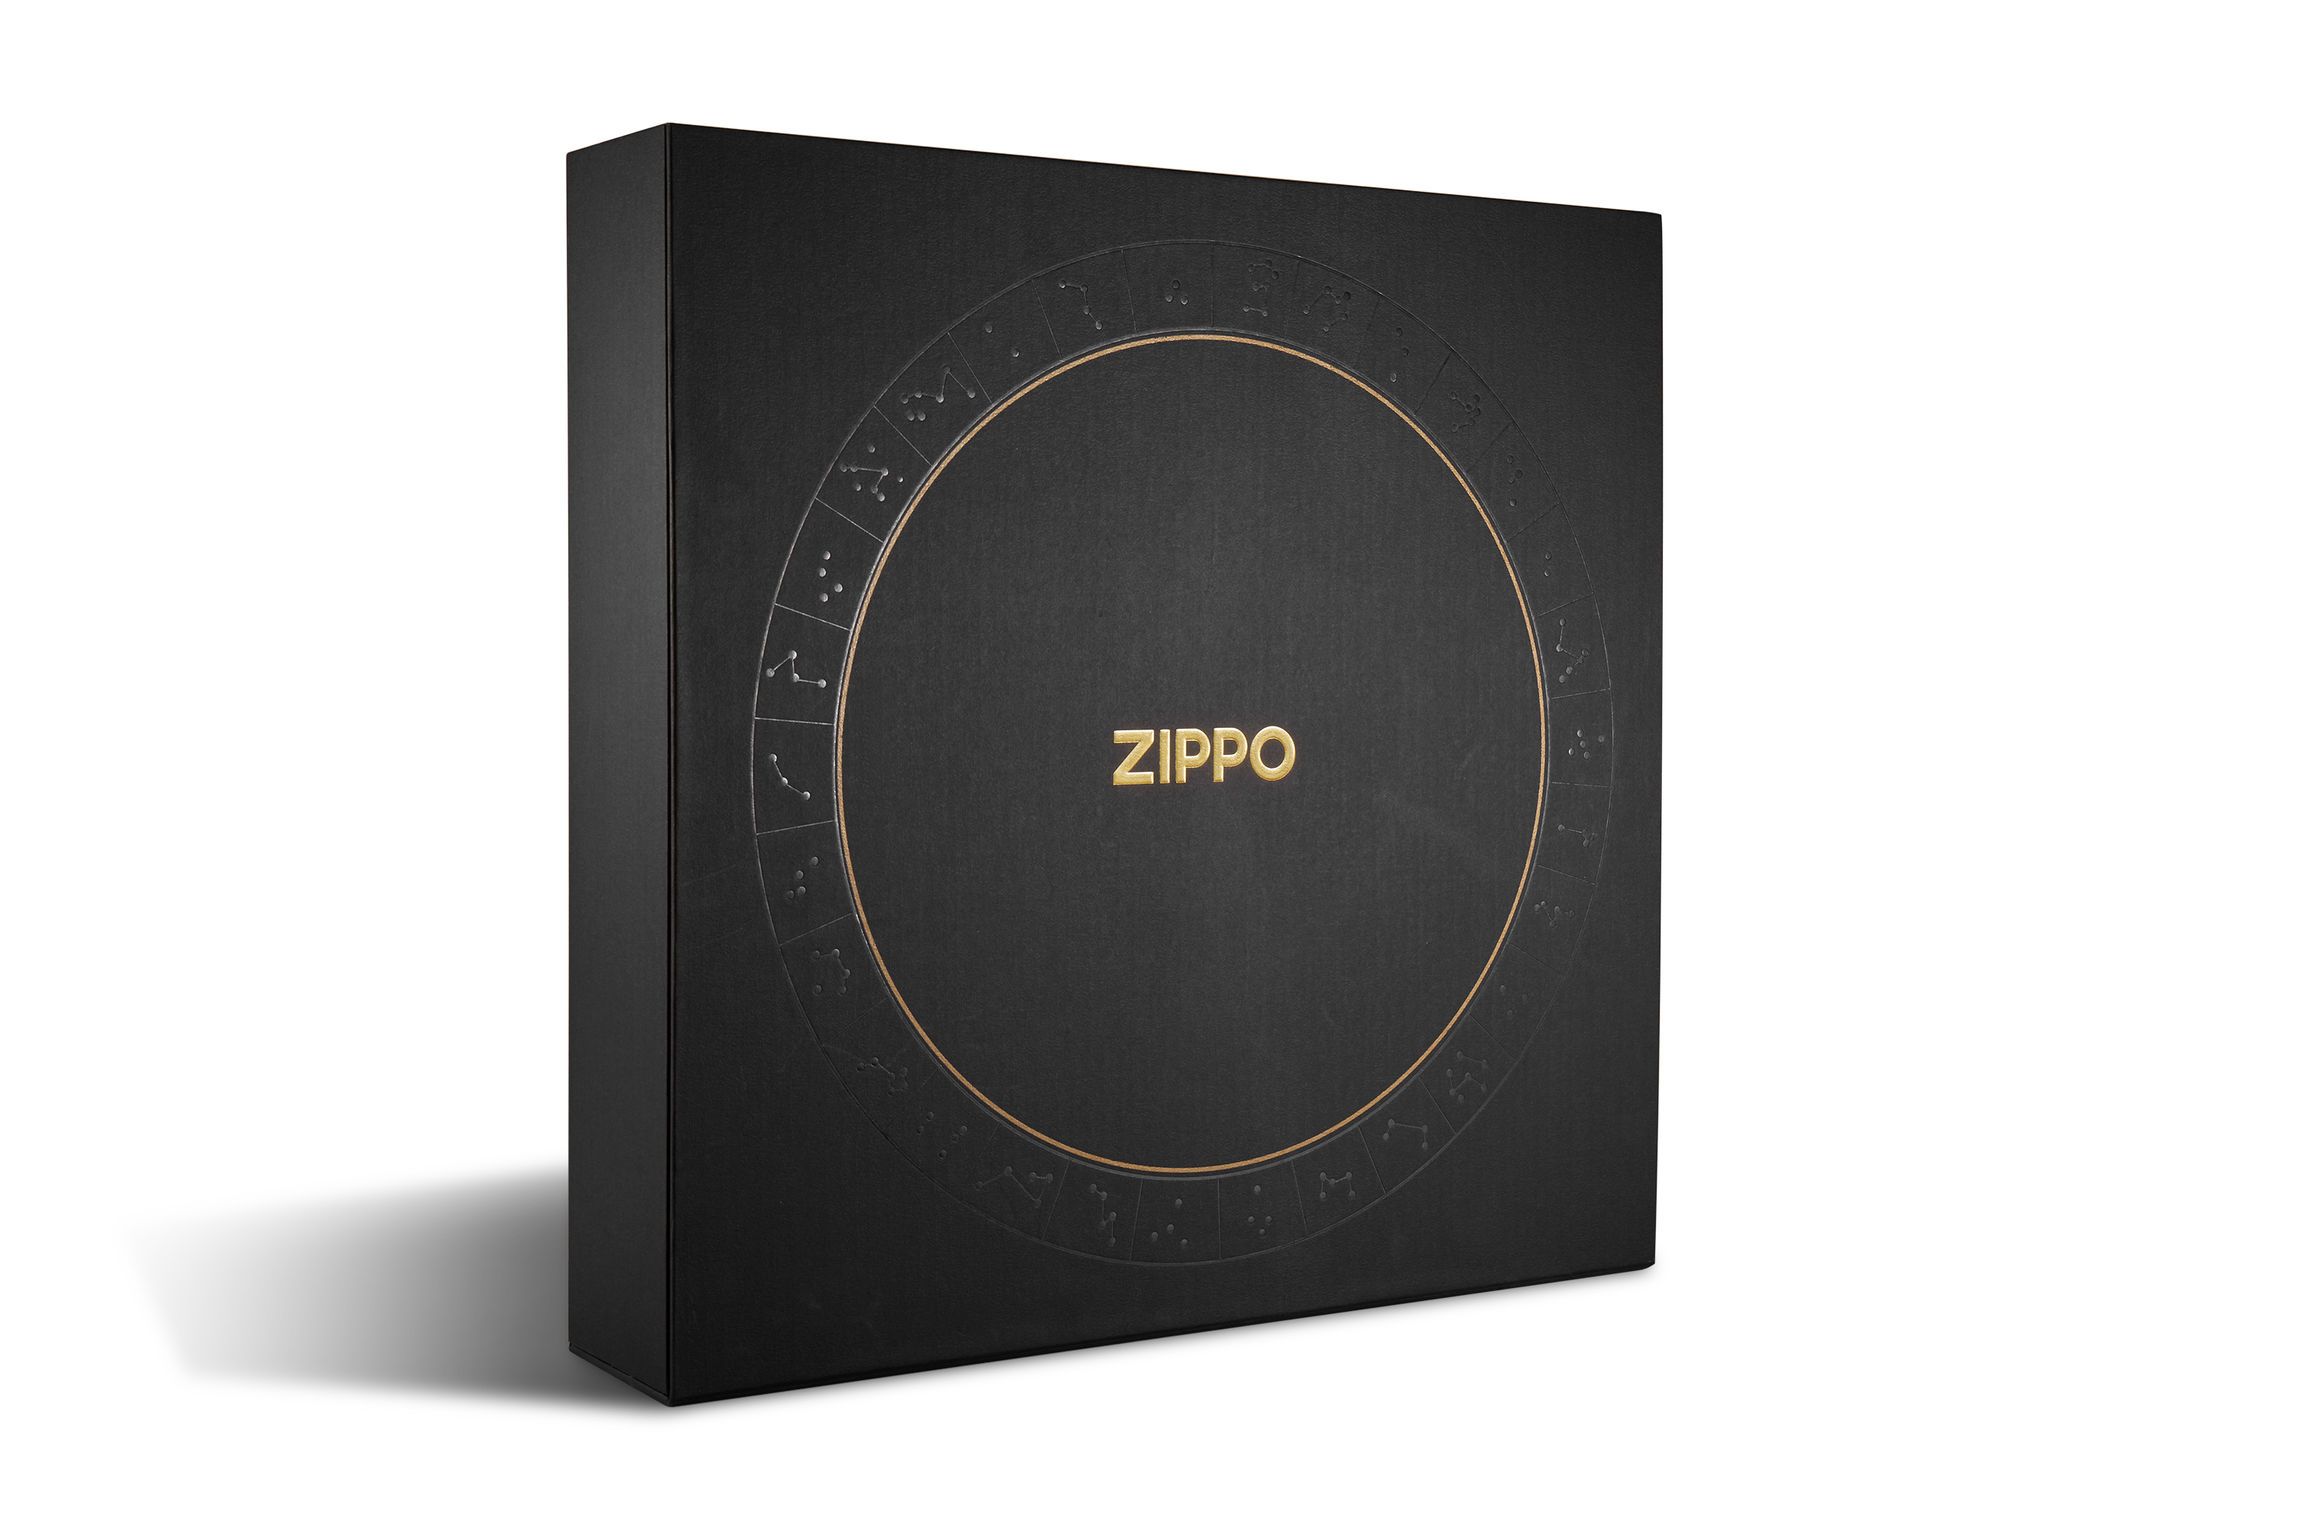 Zippo constellation limited edition packaging